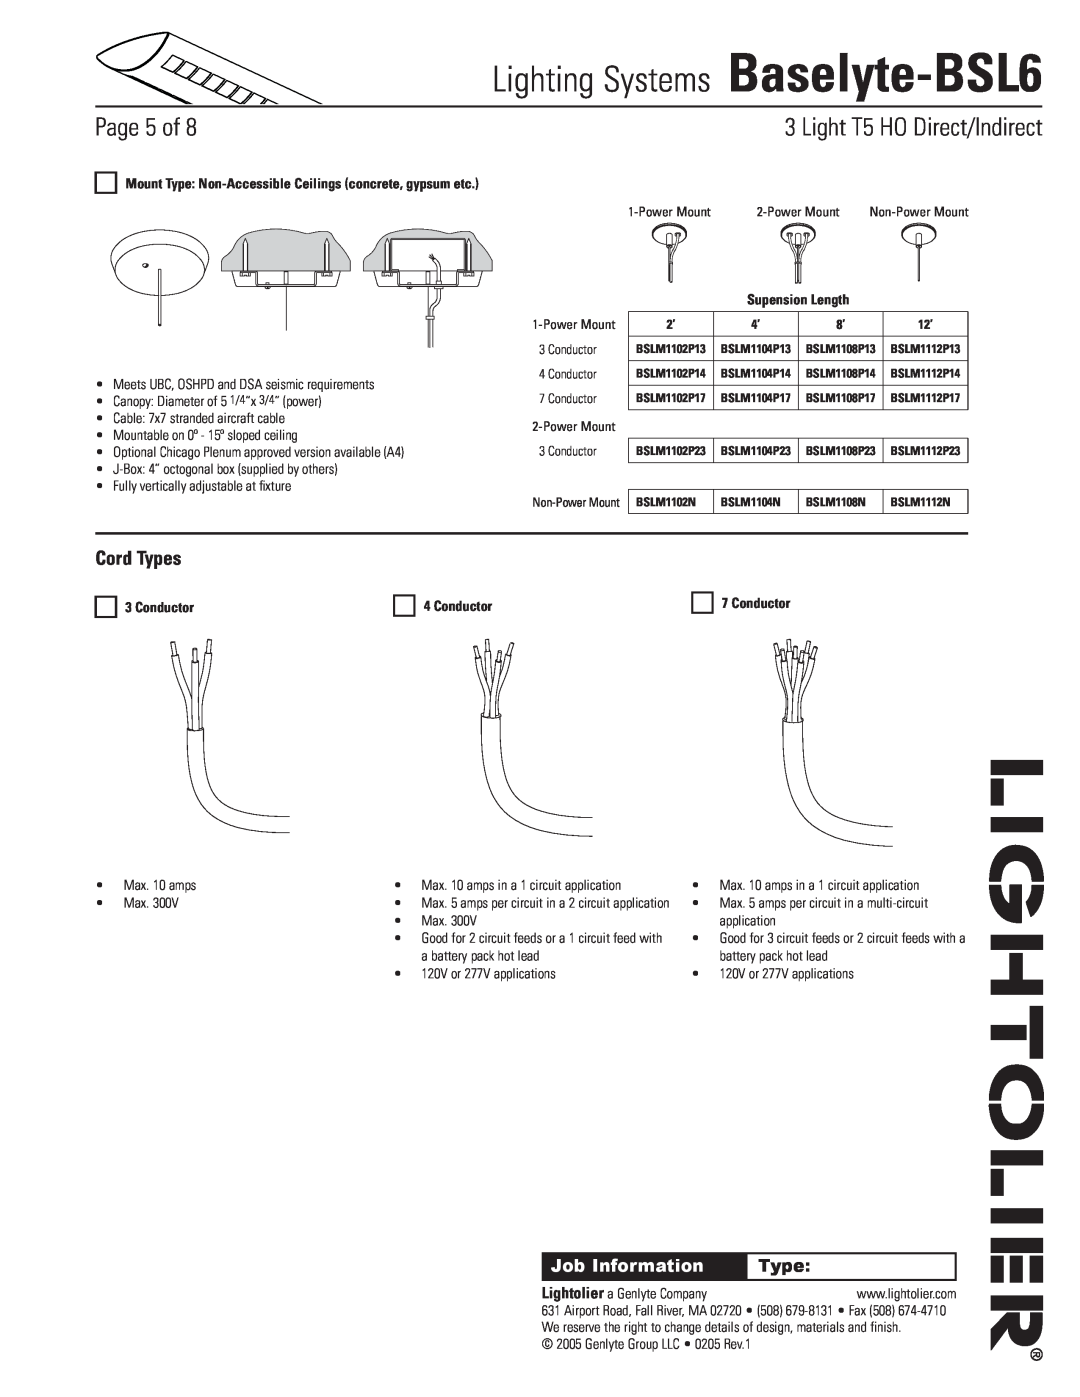 Lightolier Cord Types, Conductor, Lighting Systems Baselyte-BSL6, Page of, Light T5 HO Direct/Indirect, Job Information 